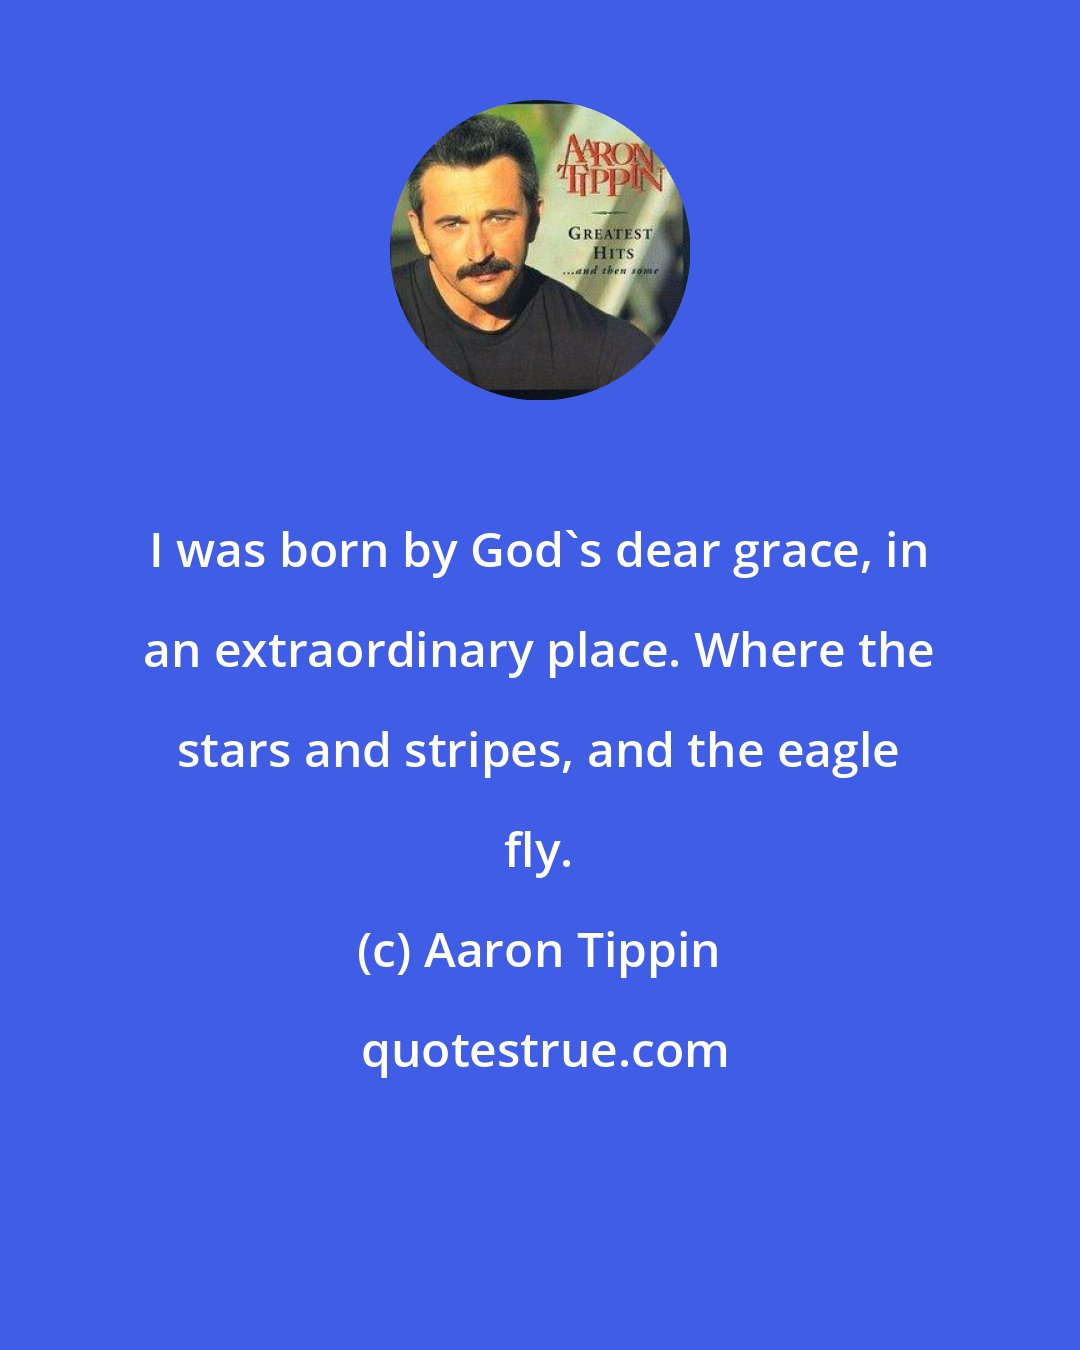 Aaron Tippin: I was born by God's dear grace, in an extraordinary place. Where the stars and stripes, and the eagle fly.